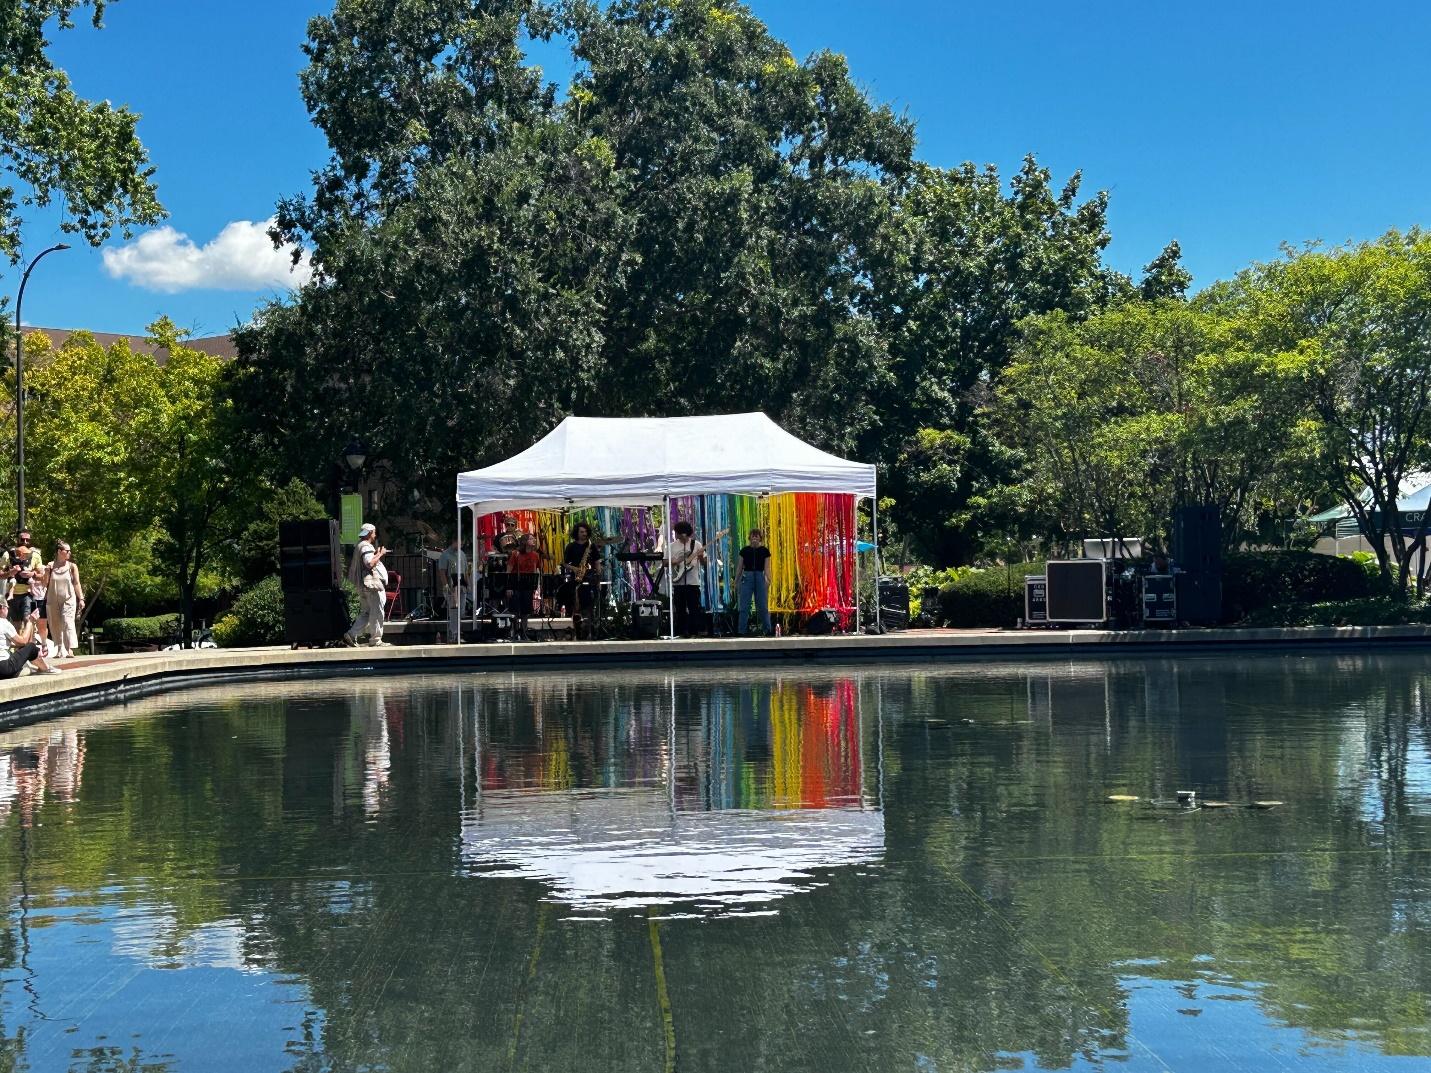 A white tent with colorful cloths on the side of a pond

Description automatically generated